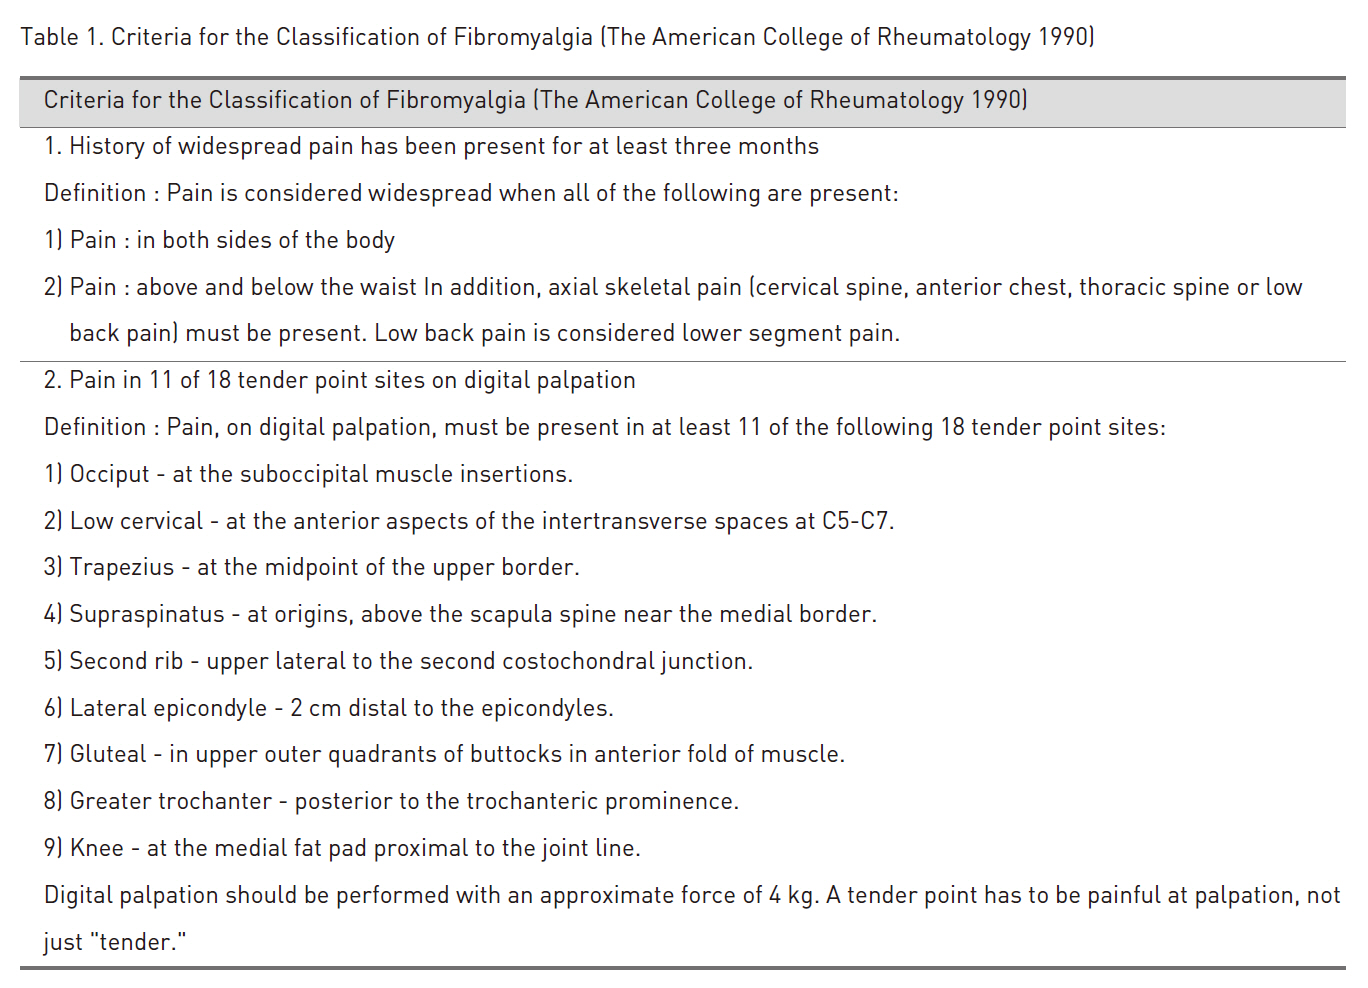 Criteria for the Classification of Fibromyalgia (The American College of Rheumatology 1990)